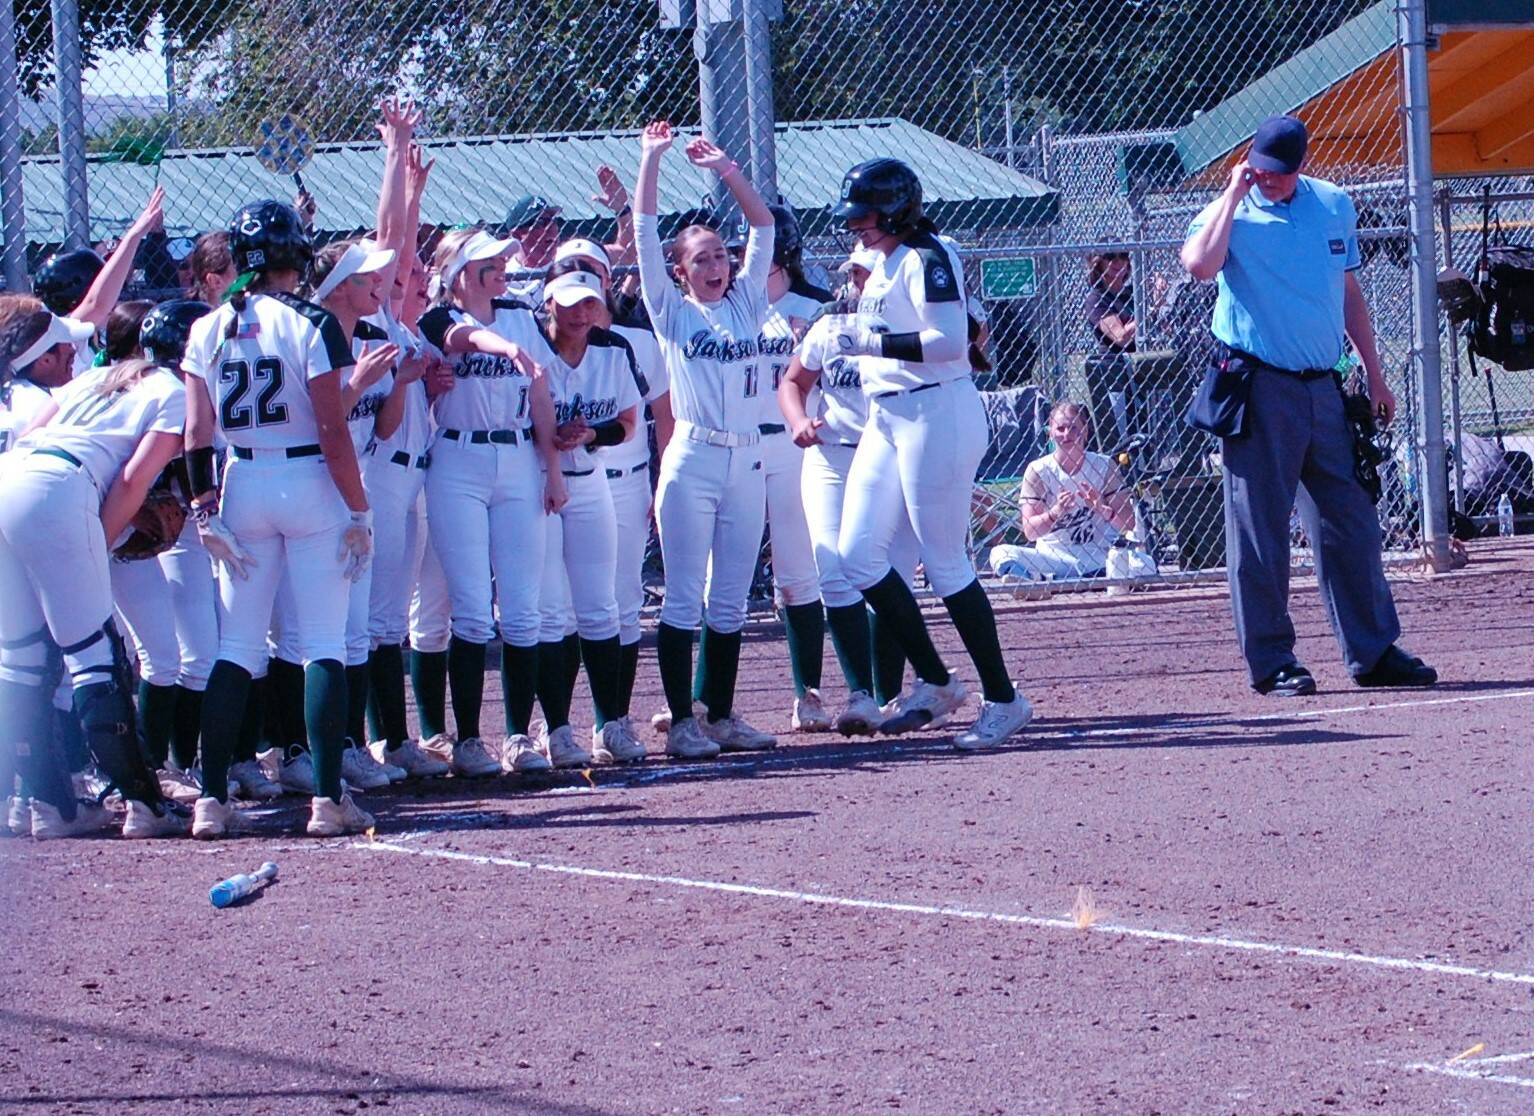 The Jackson softball team greets Yanina Sherwood after her sixth-inning, two-run homer put Jackson ahead 4-1 a Class 4A state playoff first-round game May 24 at Columbia Playfields in Richland, WA (Aaron Coe / The Herald).